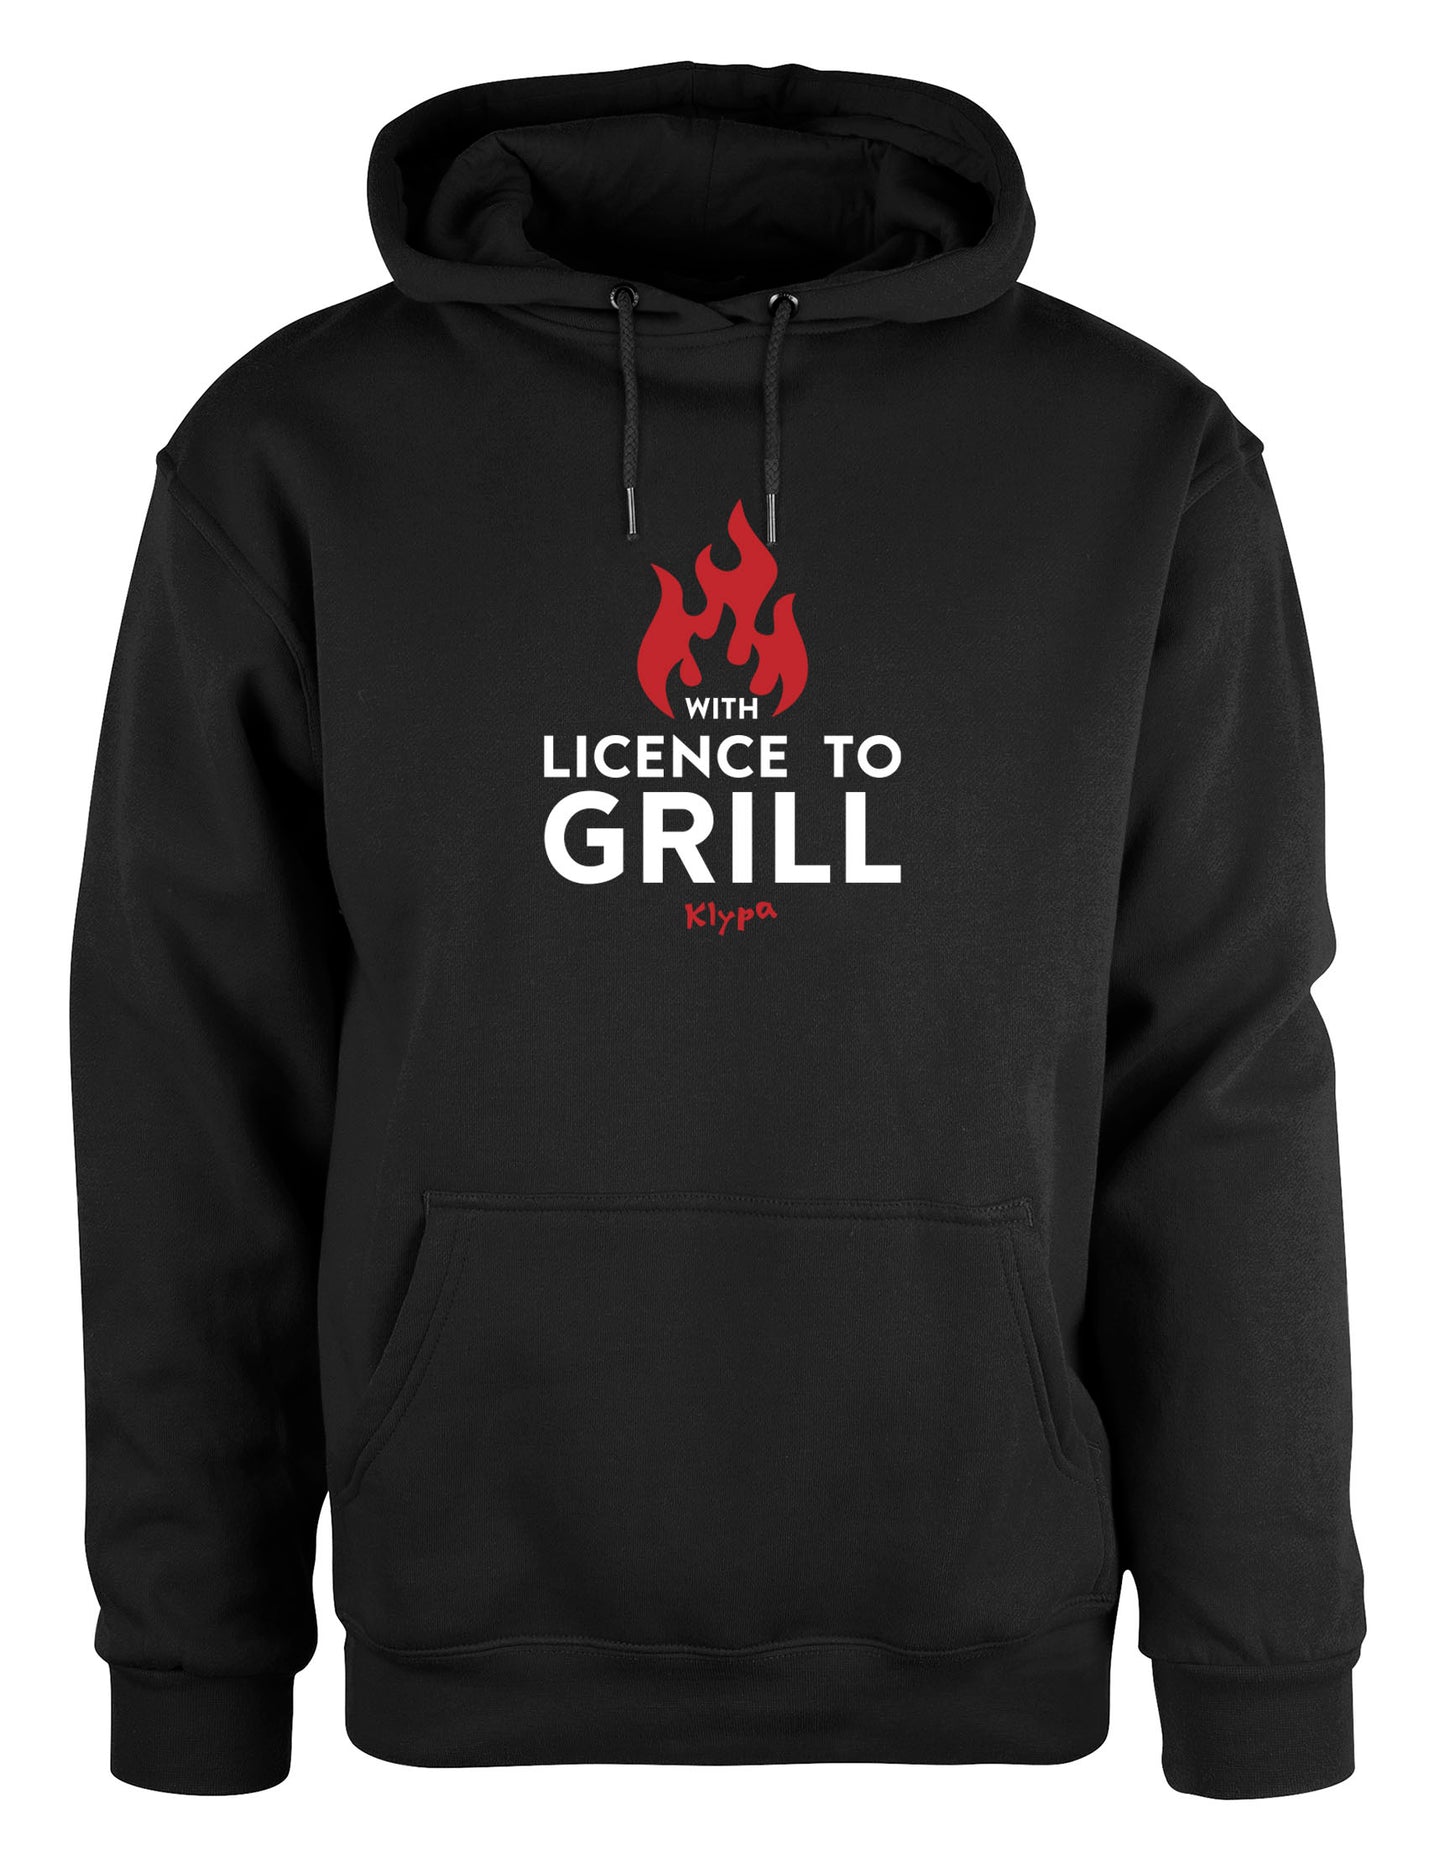 With licence to grill hoodie